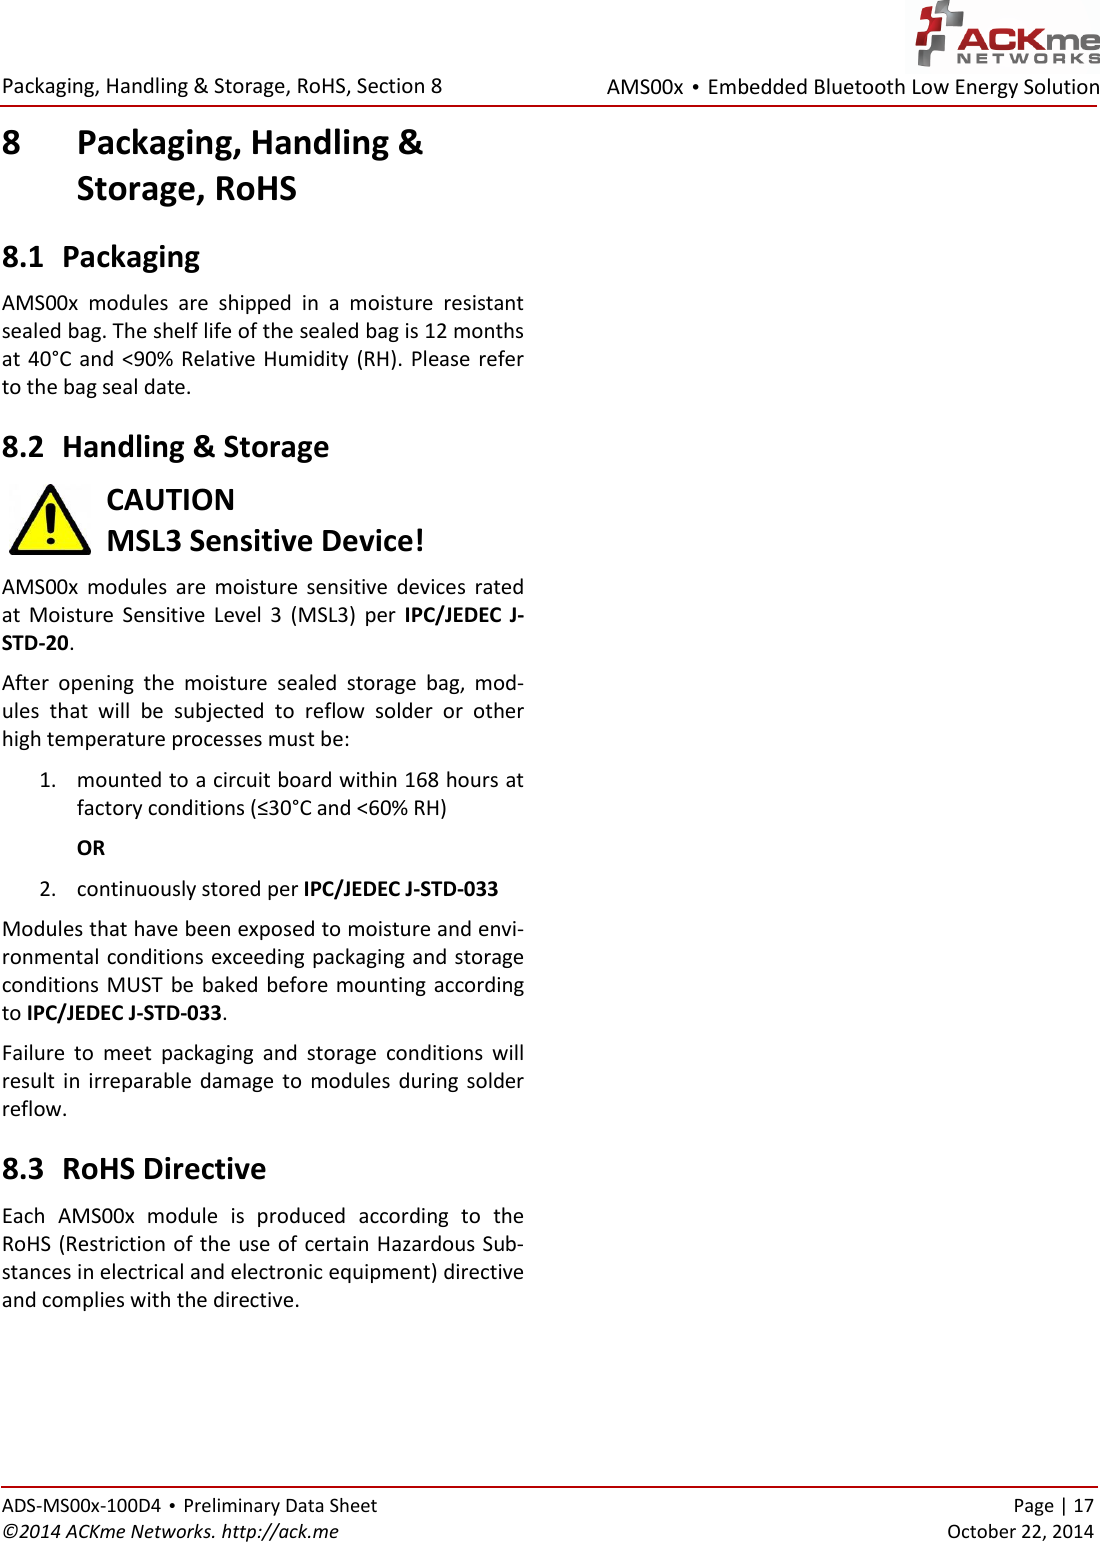 AMS00x • Embedded Bluetooth Low Energy Solution  Packaging, Handling &amp; Storage, RoHS, Section 8   ADS-MS00x-100D4 • Preliminary Data Sheet    Page | 17 ©2014 ACKme Networks. http://ack.me    October 22, 2014 8 Packaging, Handling &amp;  Storage, RoHS 8.1 Packaging AMS00x  modules  are  shipped  in  a  moisture  resistant sealed bag. The shelf life of the sealed bag is 12 months at 40°C  and  &lt;90%  Relative Humidity (RH). Please refer to the bag seal date.  8.2 Handling &amp; Storage CAUTION MSL3 Sensitive Device! AMS00x  modules  are  moisture  sensitive  devices  rated at  Moisture  Sensitive  Level  3  (MSL3)  per  IPC/JEDEC  J-STD-20.  After  opening  the  moisture  sealed  storage  bag,  mod-ules  that  will  be  subjected  to  reflow  solder  or  other high temperature processes must be: 1. mounted to a circuit board within 168 hours at factory conditions (≤30°C and &lt;60% RH) OR 2. continuously stored per IPC/JEDEC J-STD-033 Modules that have been exposed to moisture and envi-ronmental conditions exceeding packaging and storage conditions MUST  be baked before mounting according to IPC/JEDEC J-STD-033.  Failure  to  meet  packaging  and  storage  conditions  will result  in  irreparable damage to  modules during solder reflow. 8.3 RoHS Directive Each  AMS00x  module  is  produced  according  to  the RoHS (Restriction of the use of certain Hazardous Sub-stances in electrical and electronic equipment) directive and complies with the directive.   